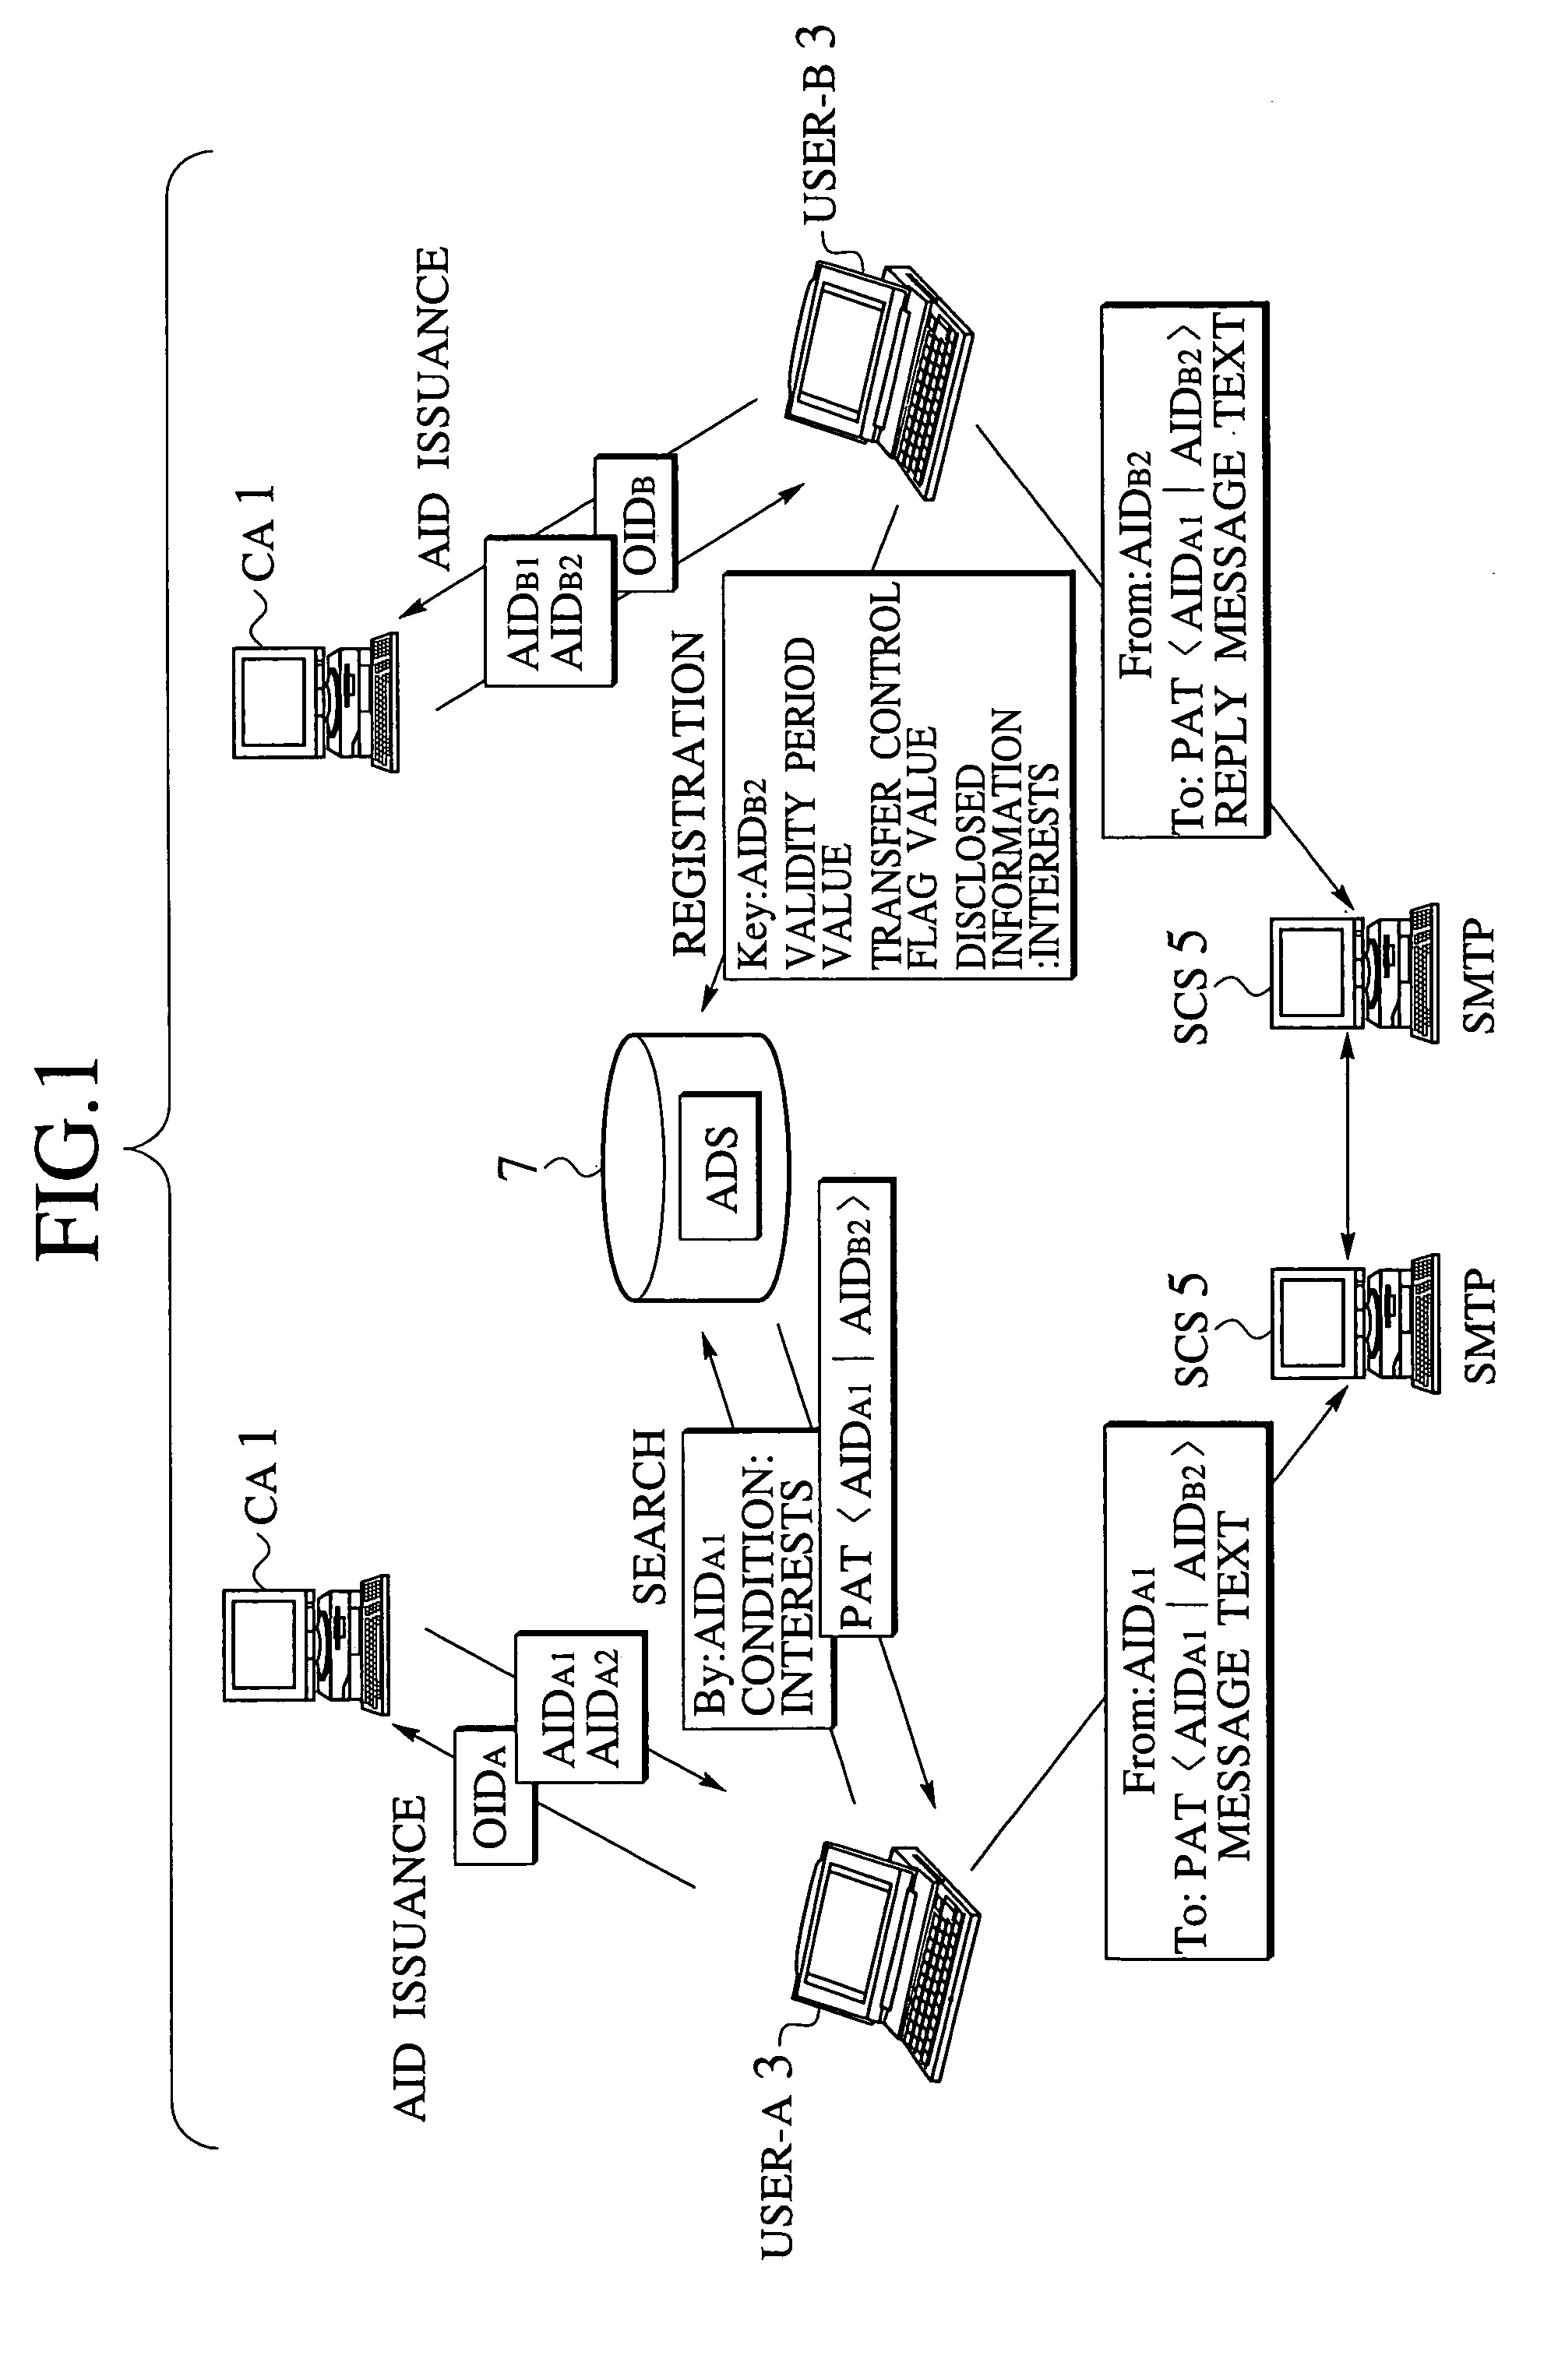 Email access control scheme for communication network using identification concealment mechanism